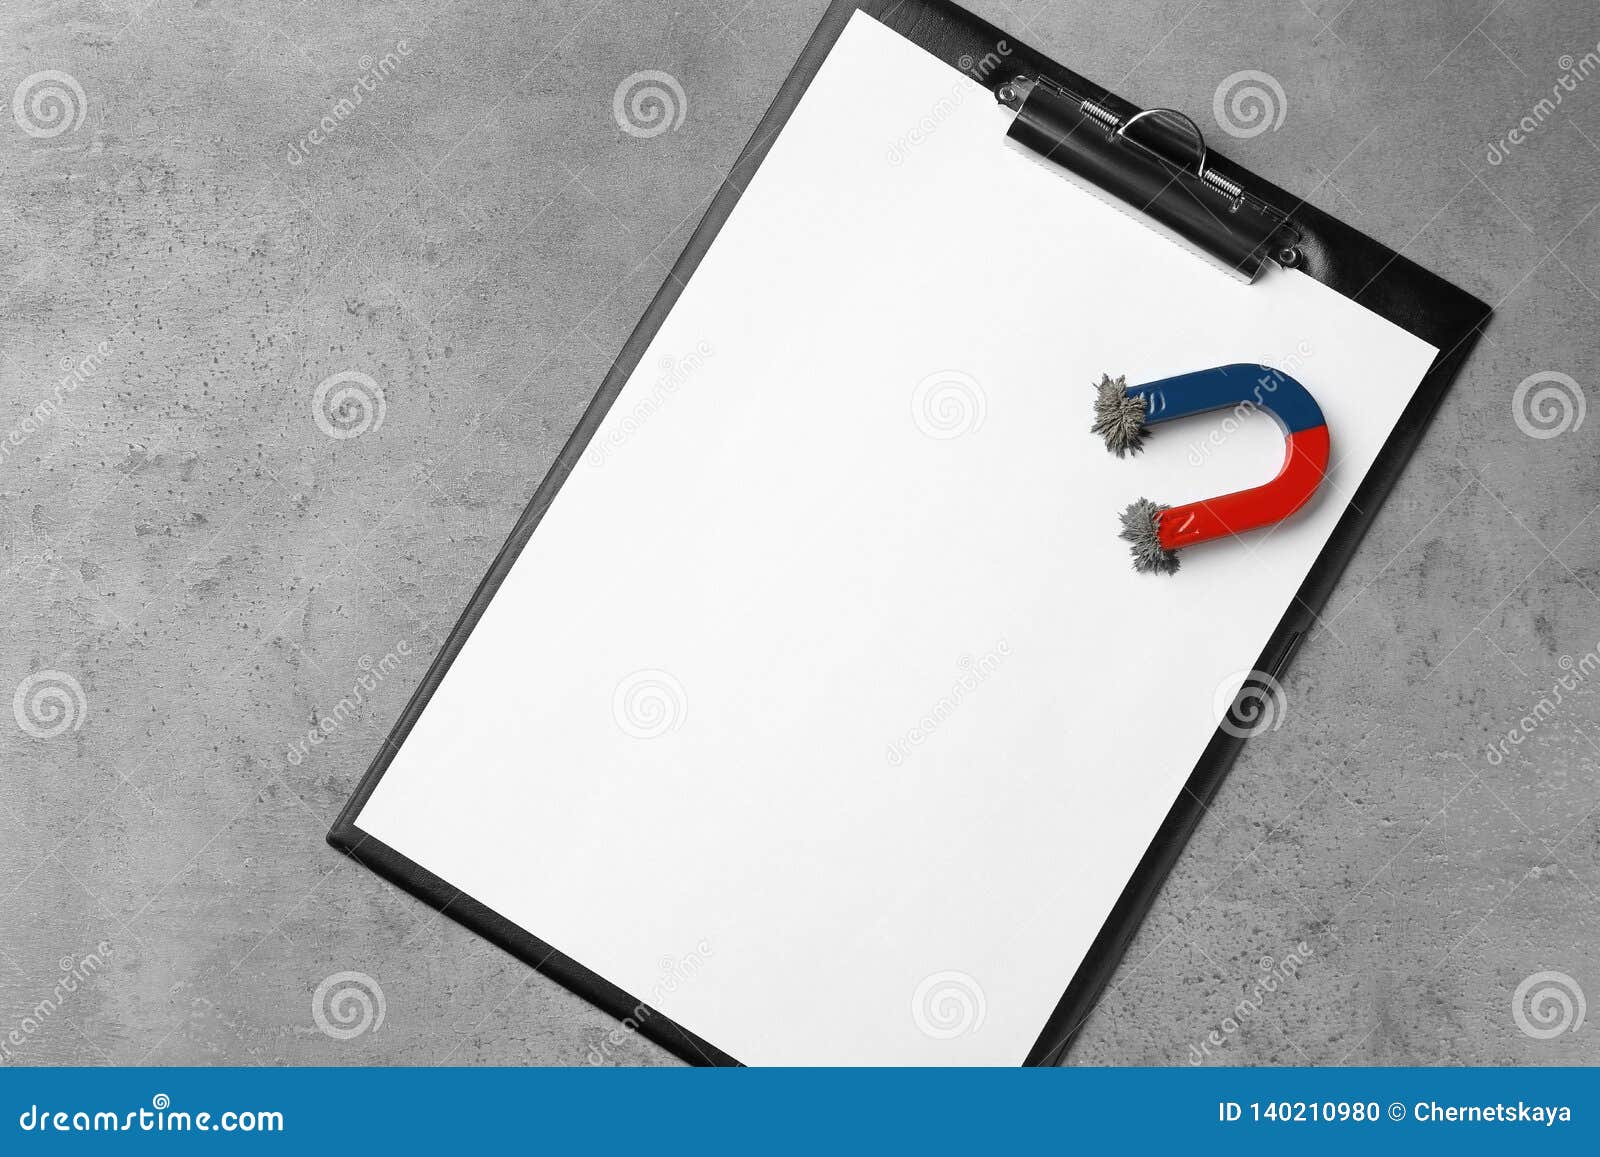 Omhyggelig læsning tempo uafhængigt Clipboard and Magnet with Iron Powder on Grey Background, Top View. Stock  Photo - Image of field, equipment: 140210980